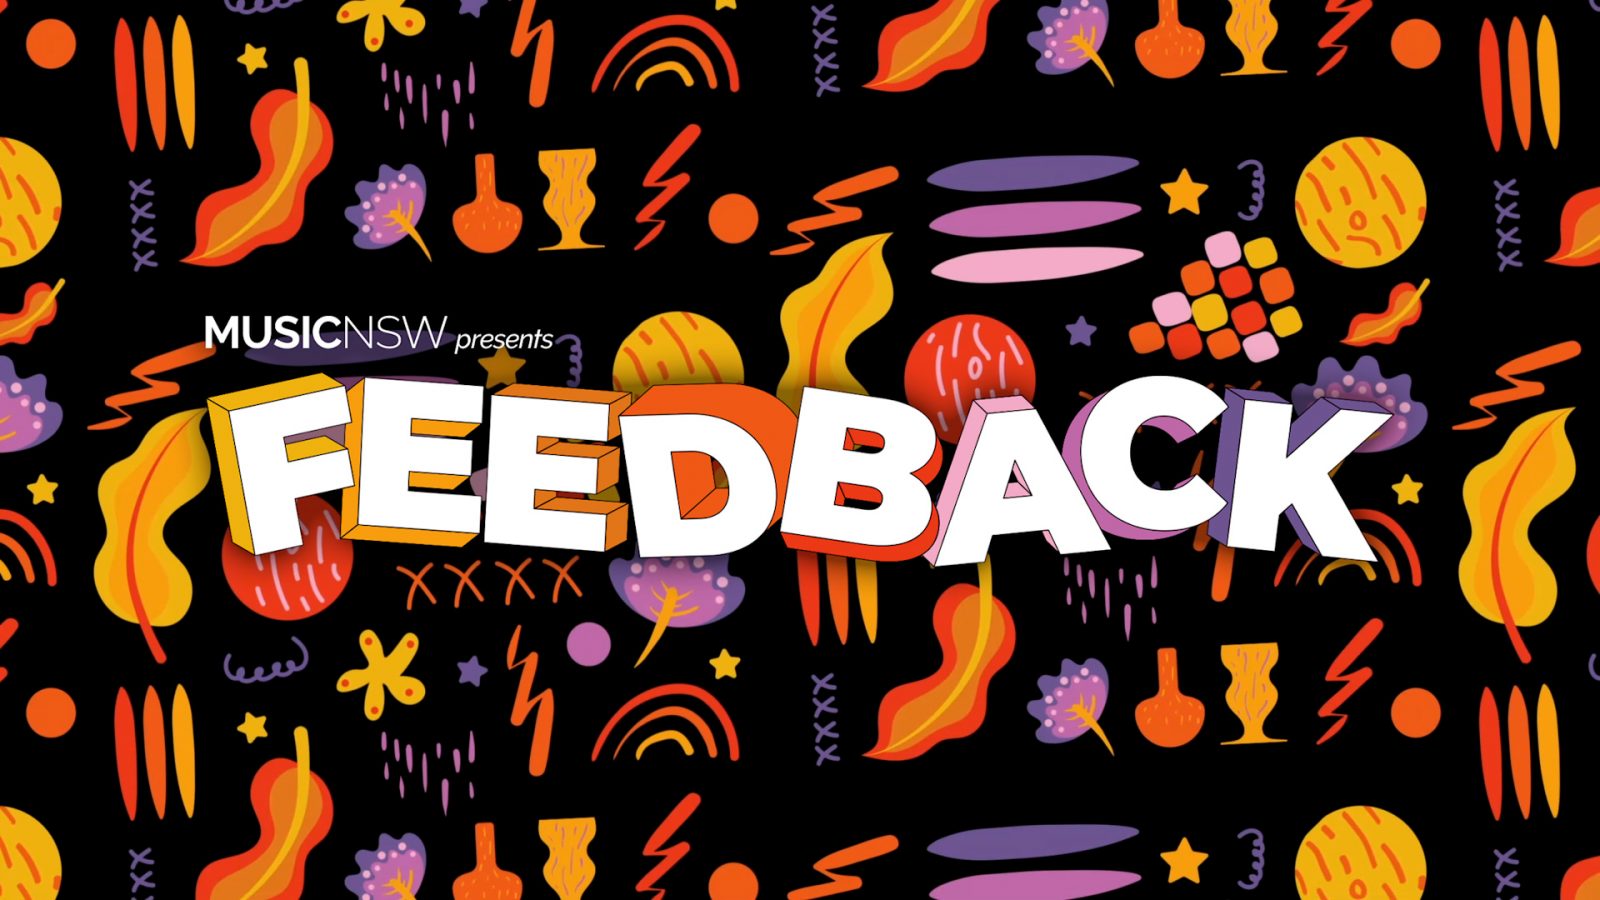 Feedback logo on black background with colourful shapes and patterns